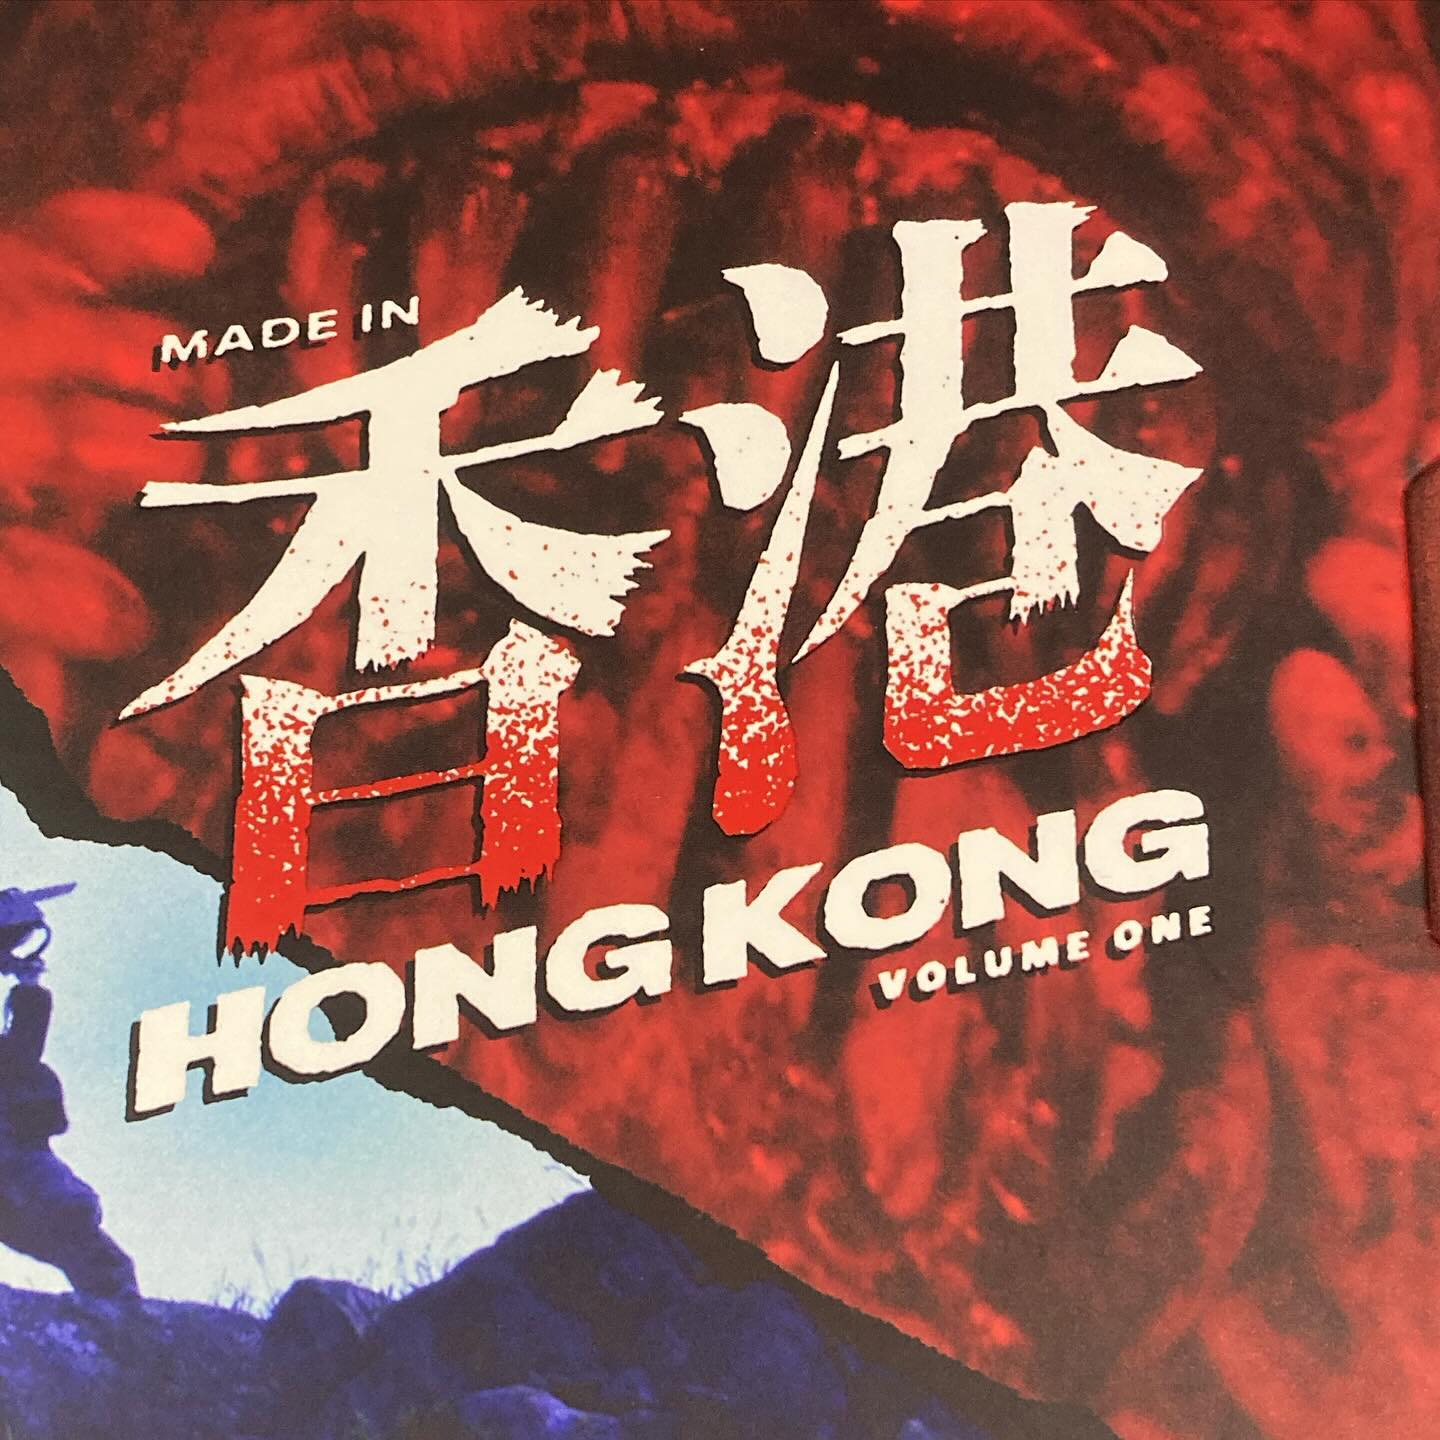 Made in Hong Kong Vol 1 log From Vinegar Syndrome box set release